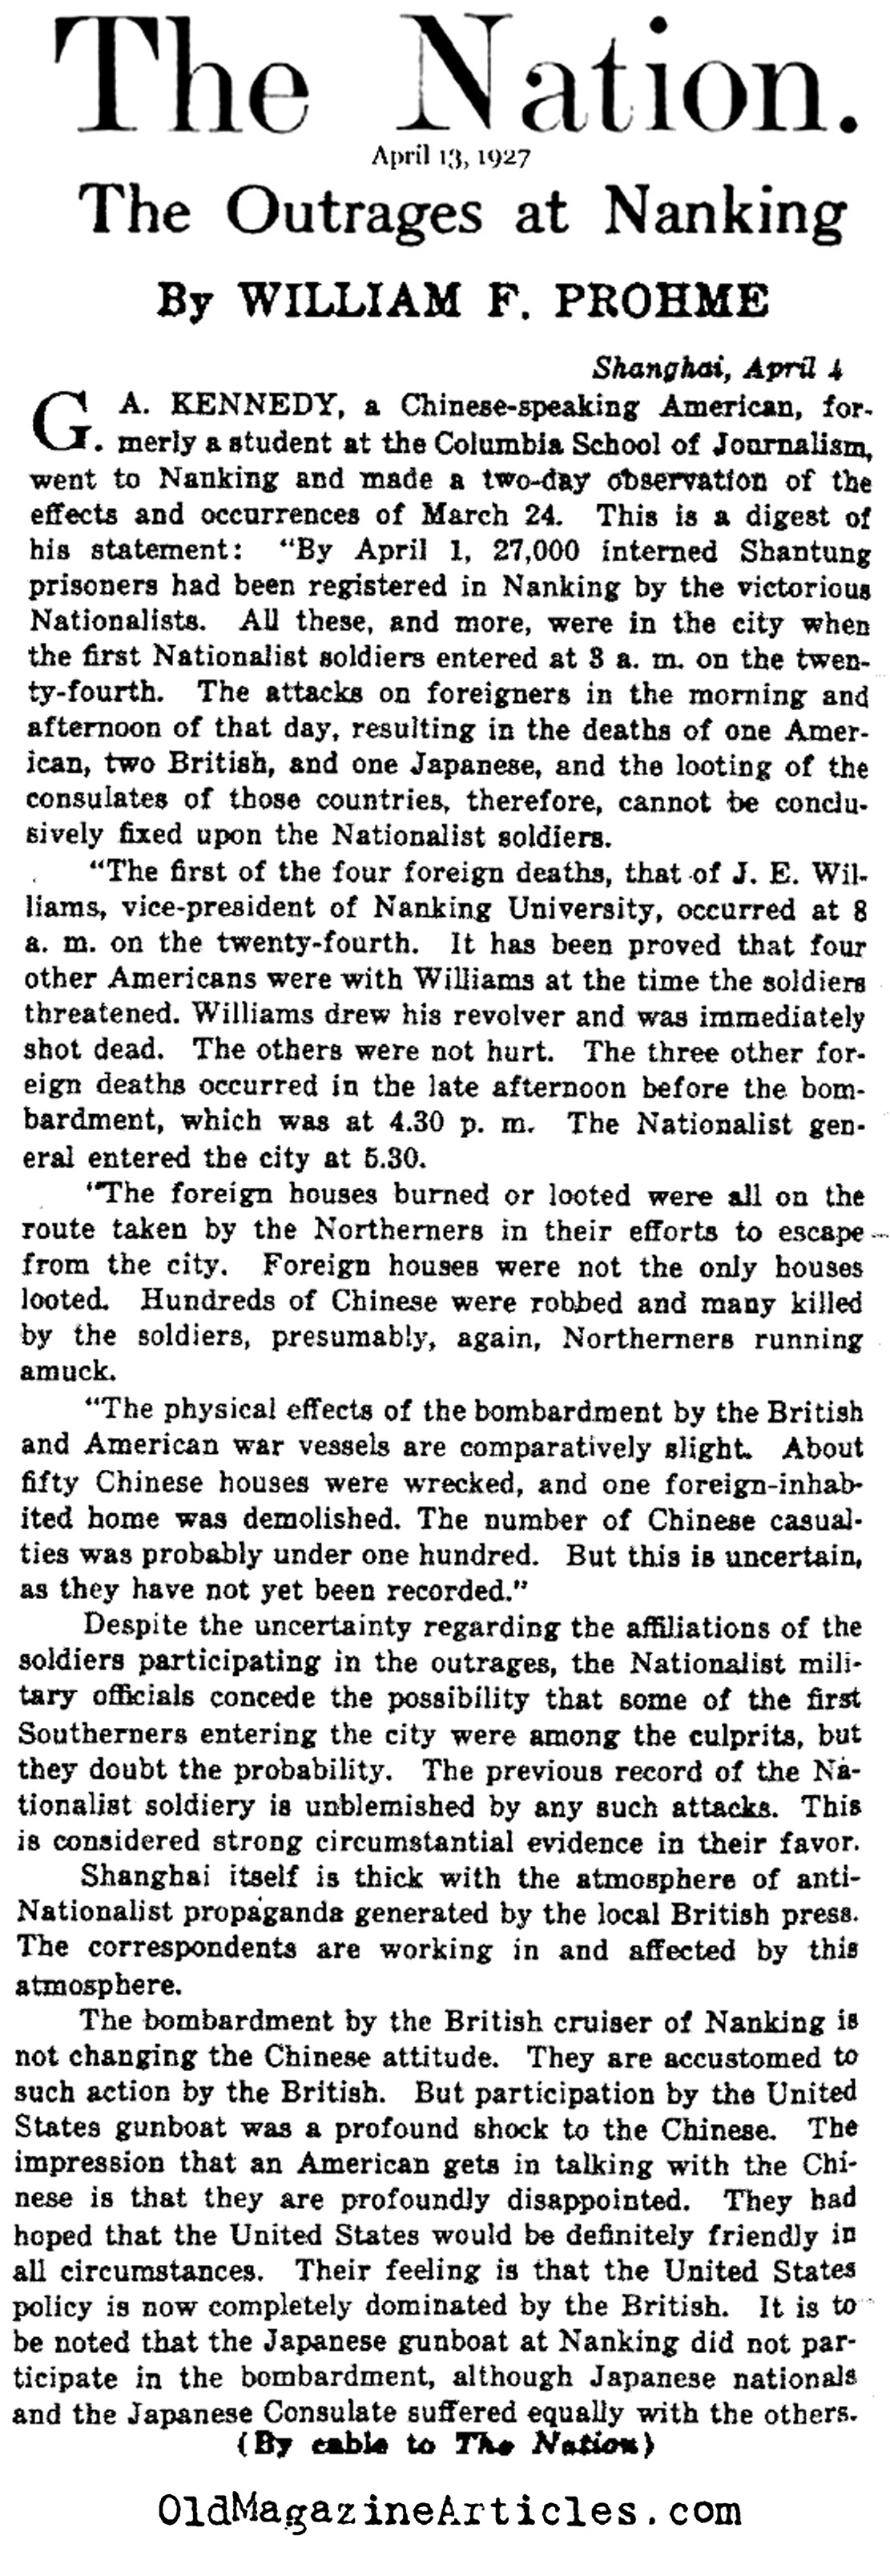 Chaos in Nanking (The Nation, 1927)